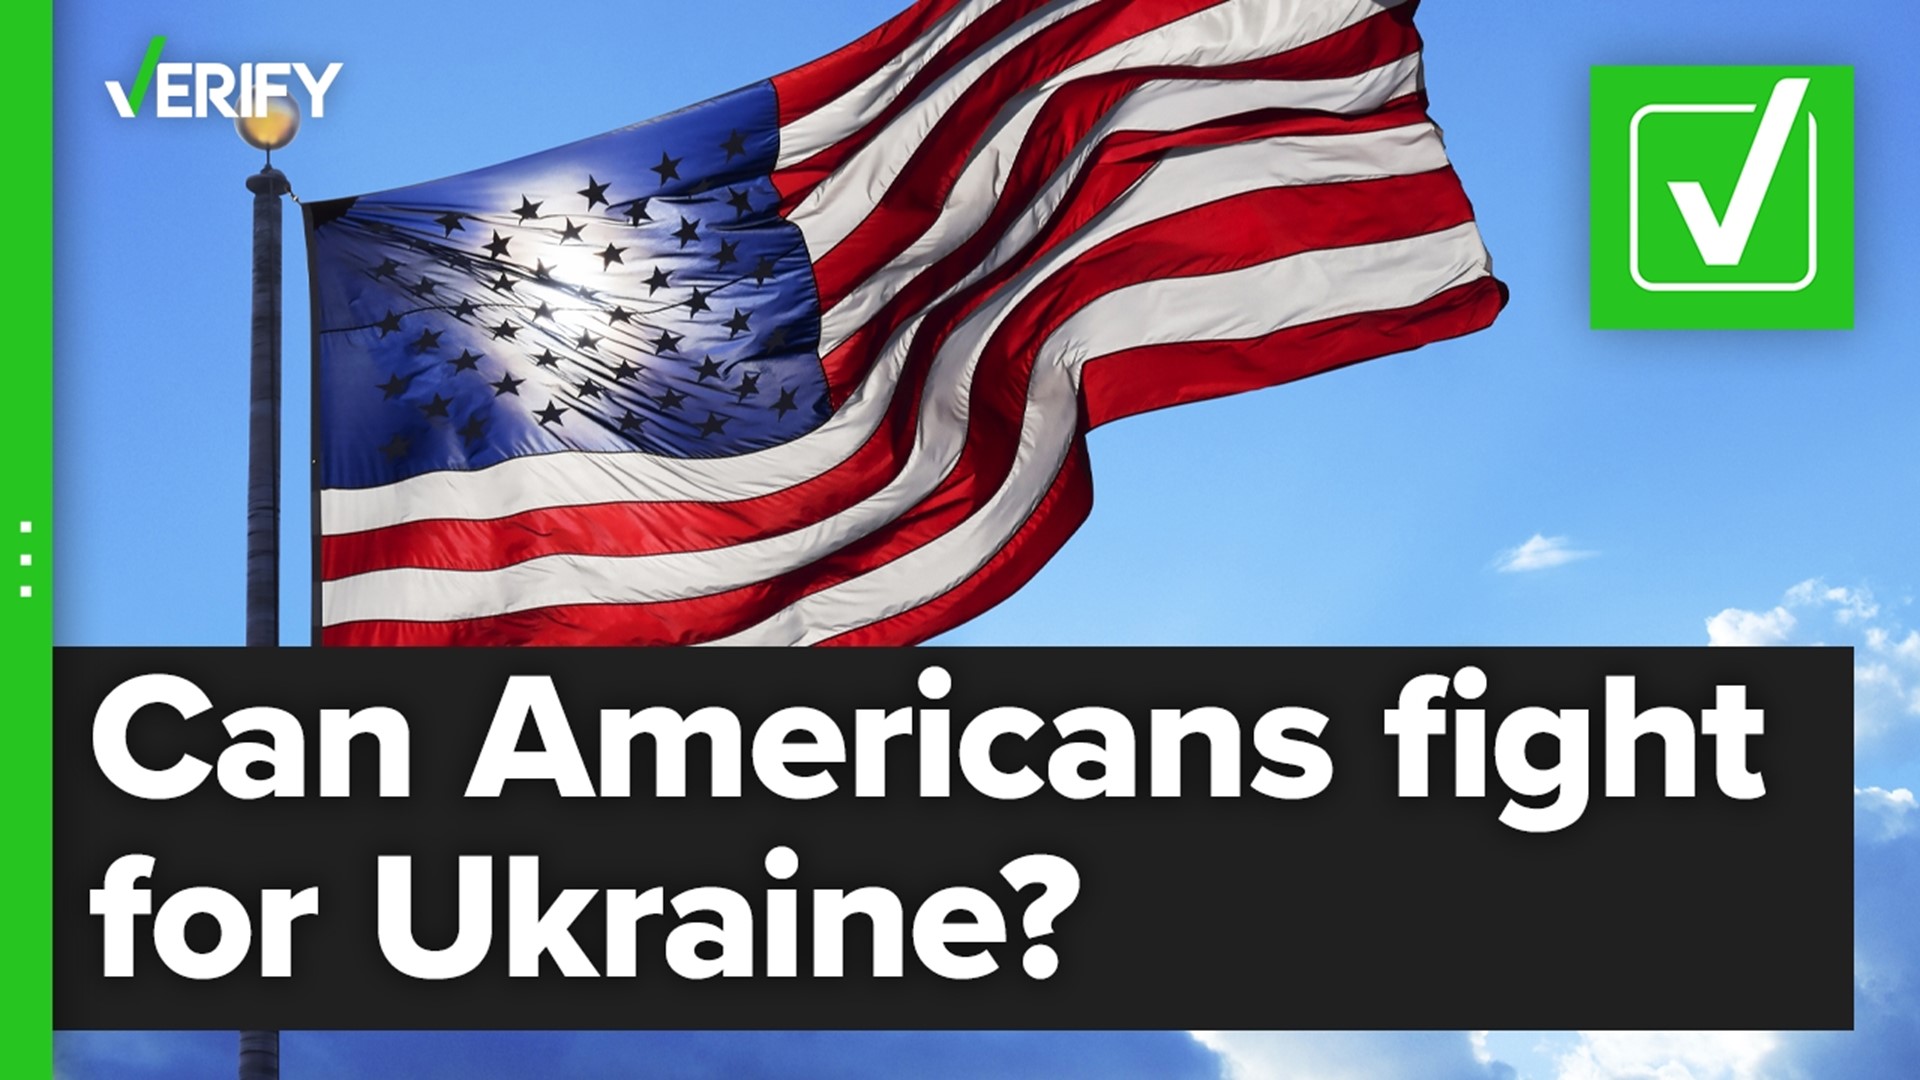 American citizens can legally go abroad to fight in foreign wars, including in Ukraine’s defense from Russia’s invasion.